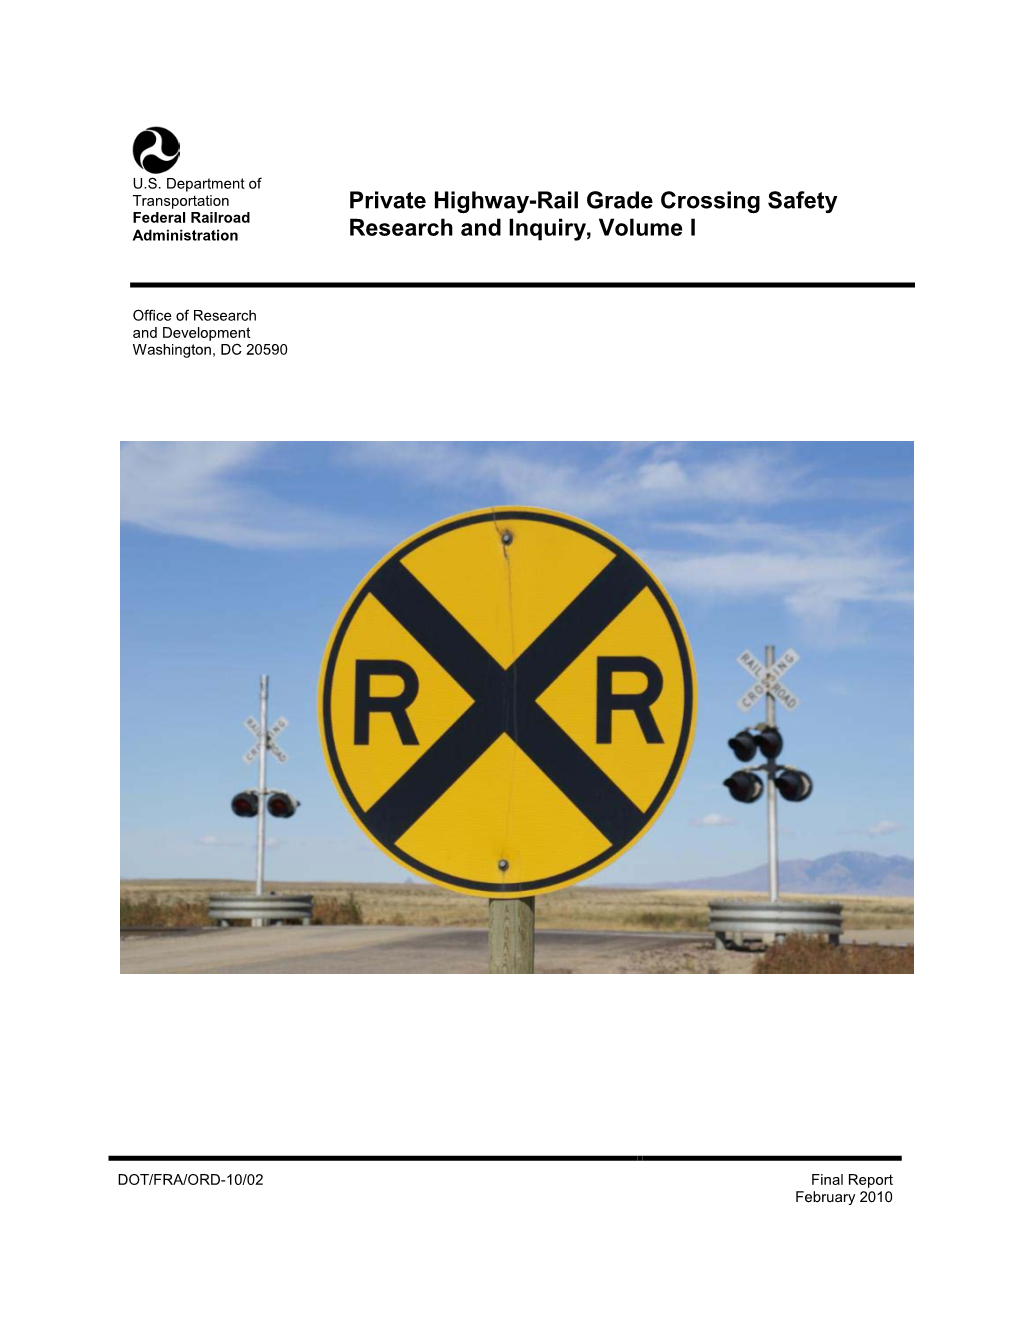 Private Highway-Rail Grade Crossings Safety Research and Inquiry